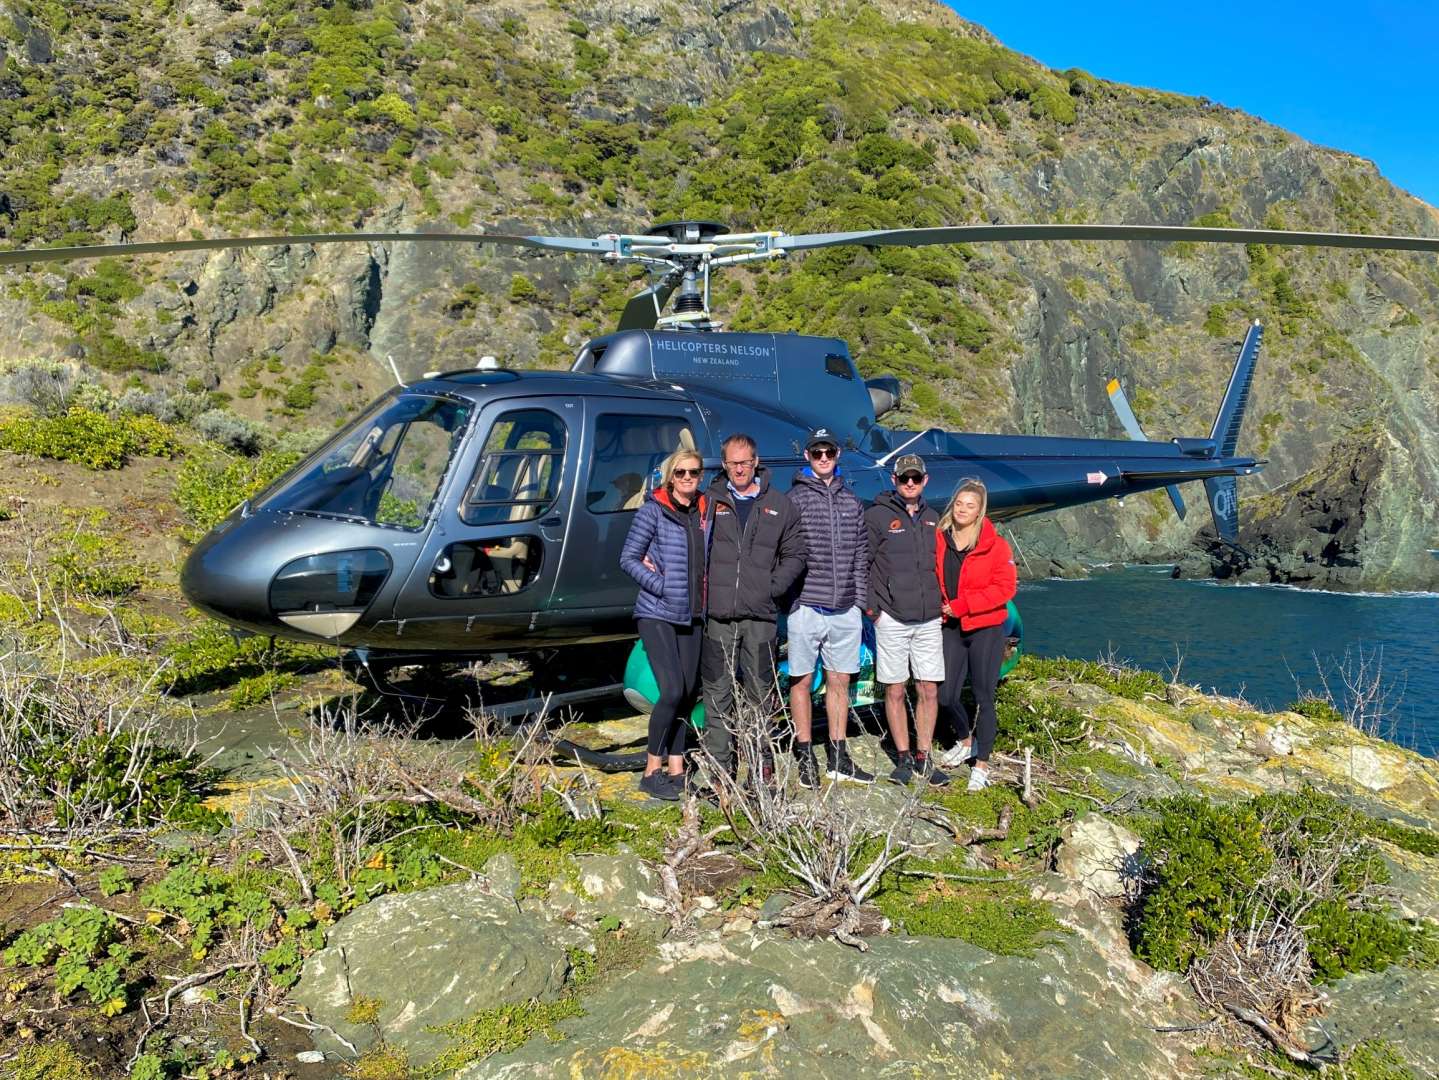 Fishing Tour attraction Nelson Marlborough with Helicopter